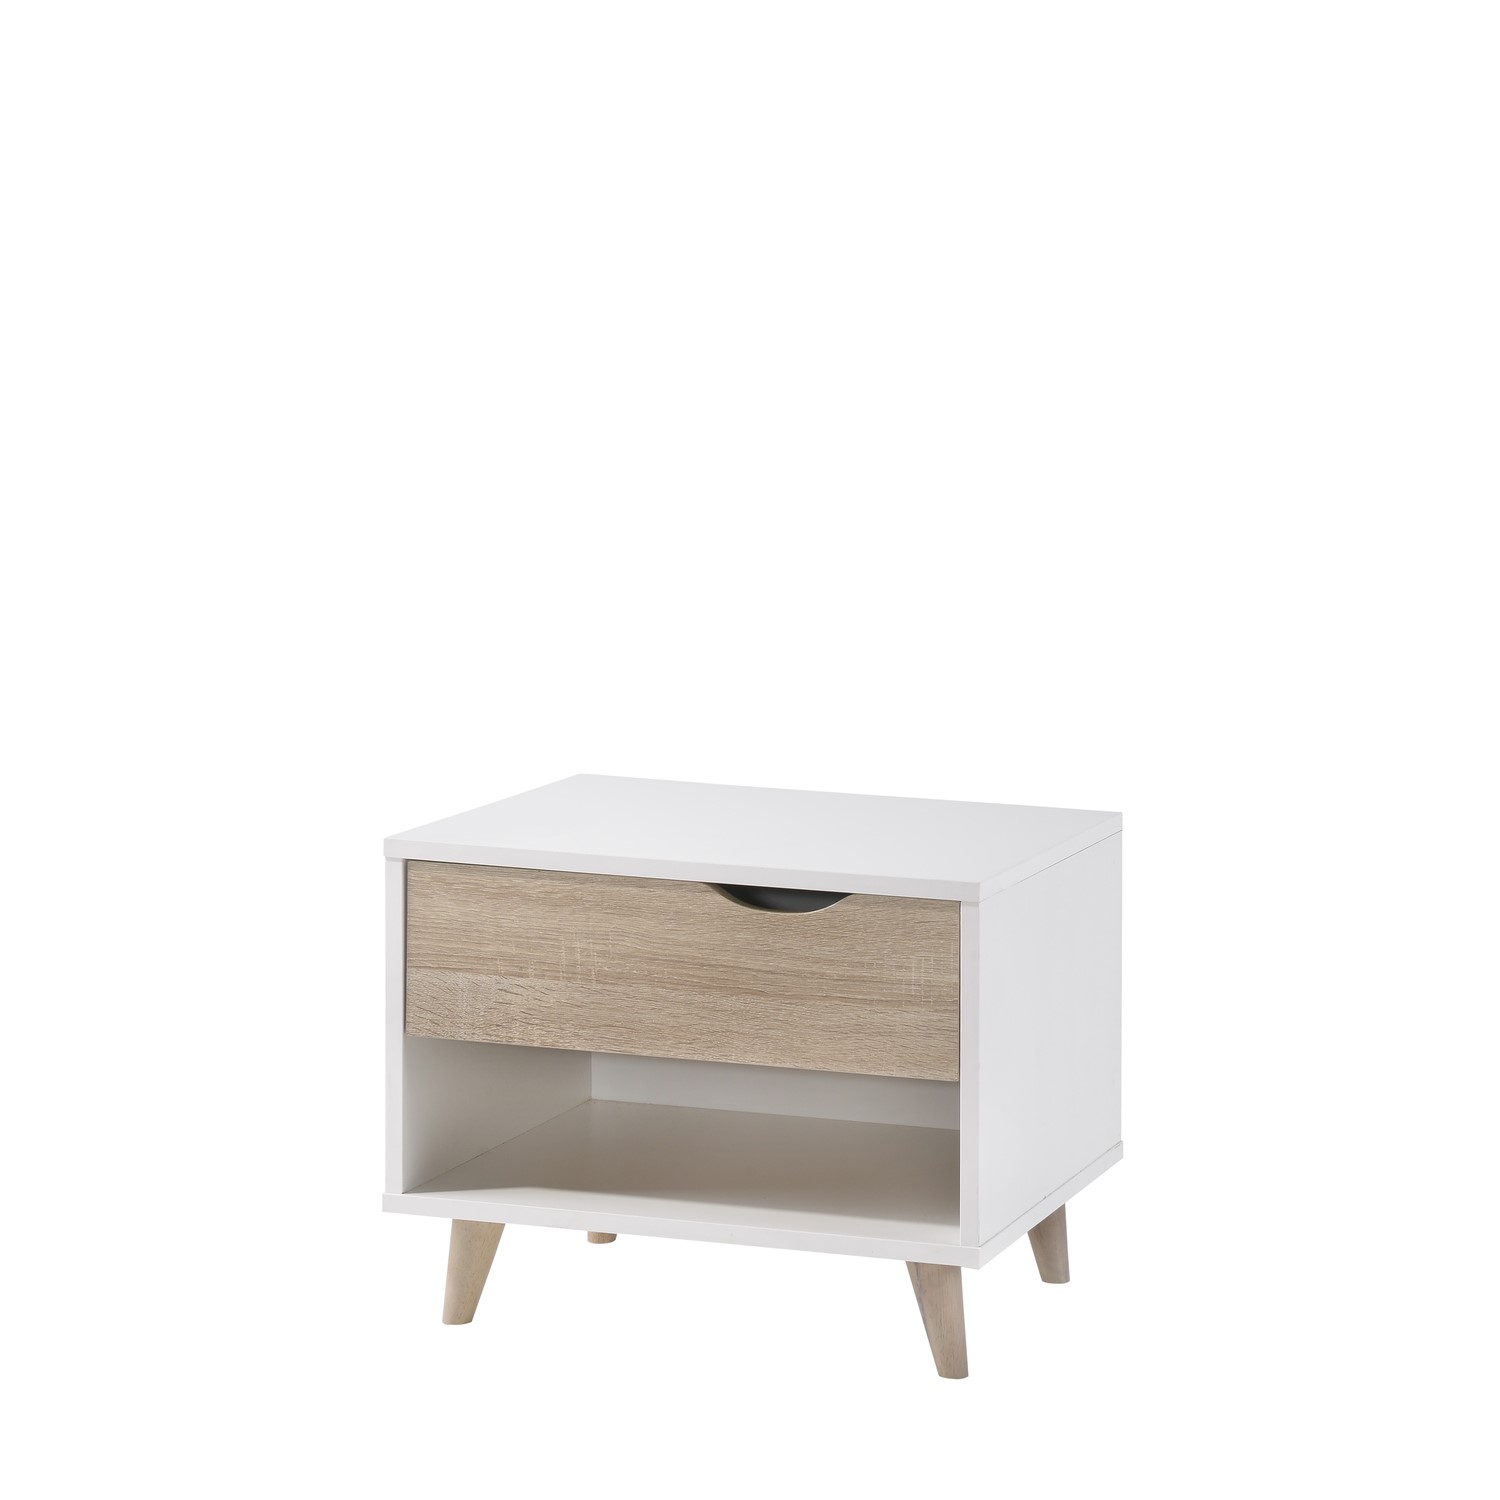 Read more about Scandi white and oak bedside table with drawer lpd